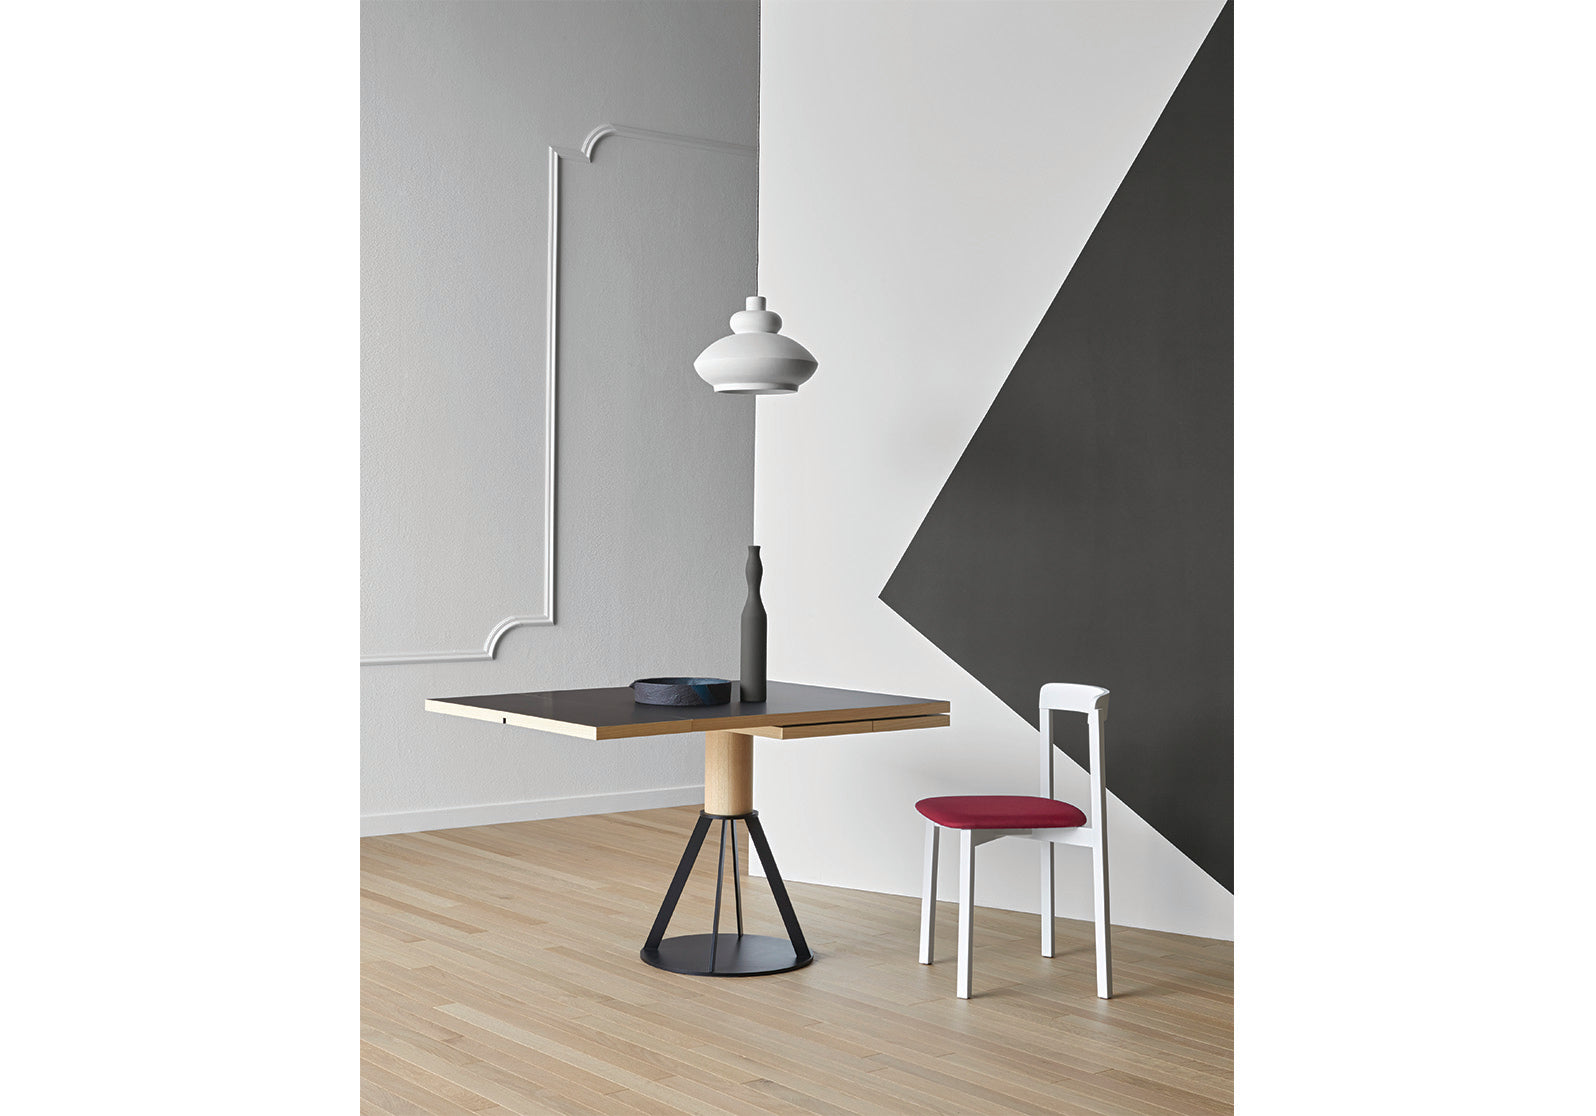 Geronimo Extendable Dining Table